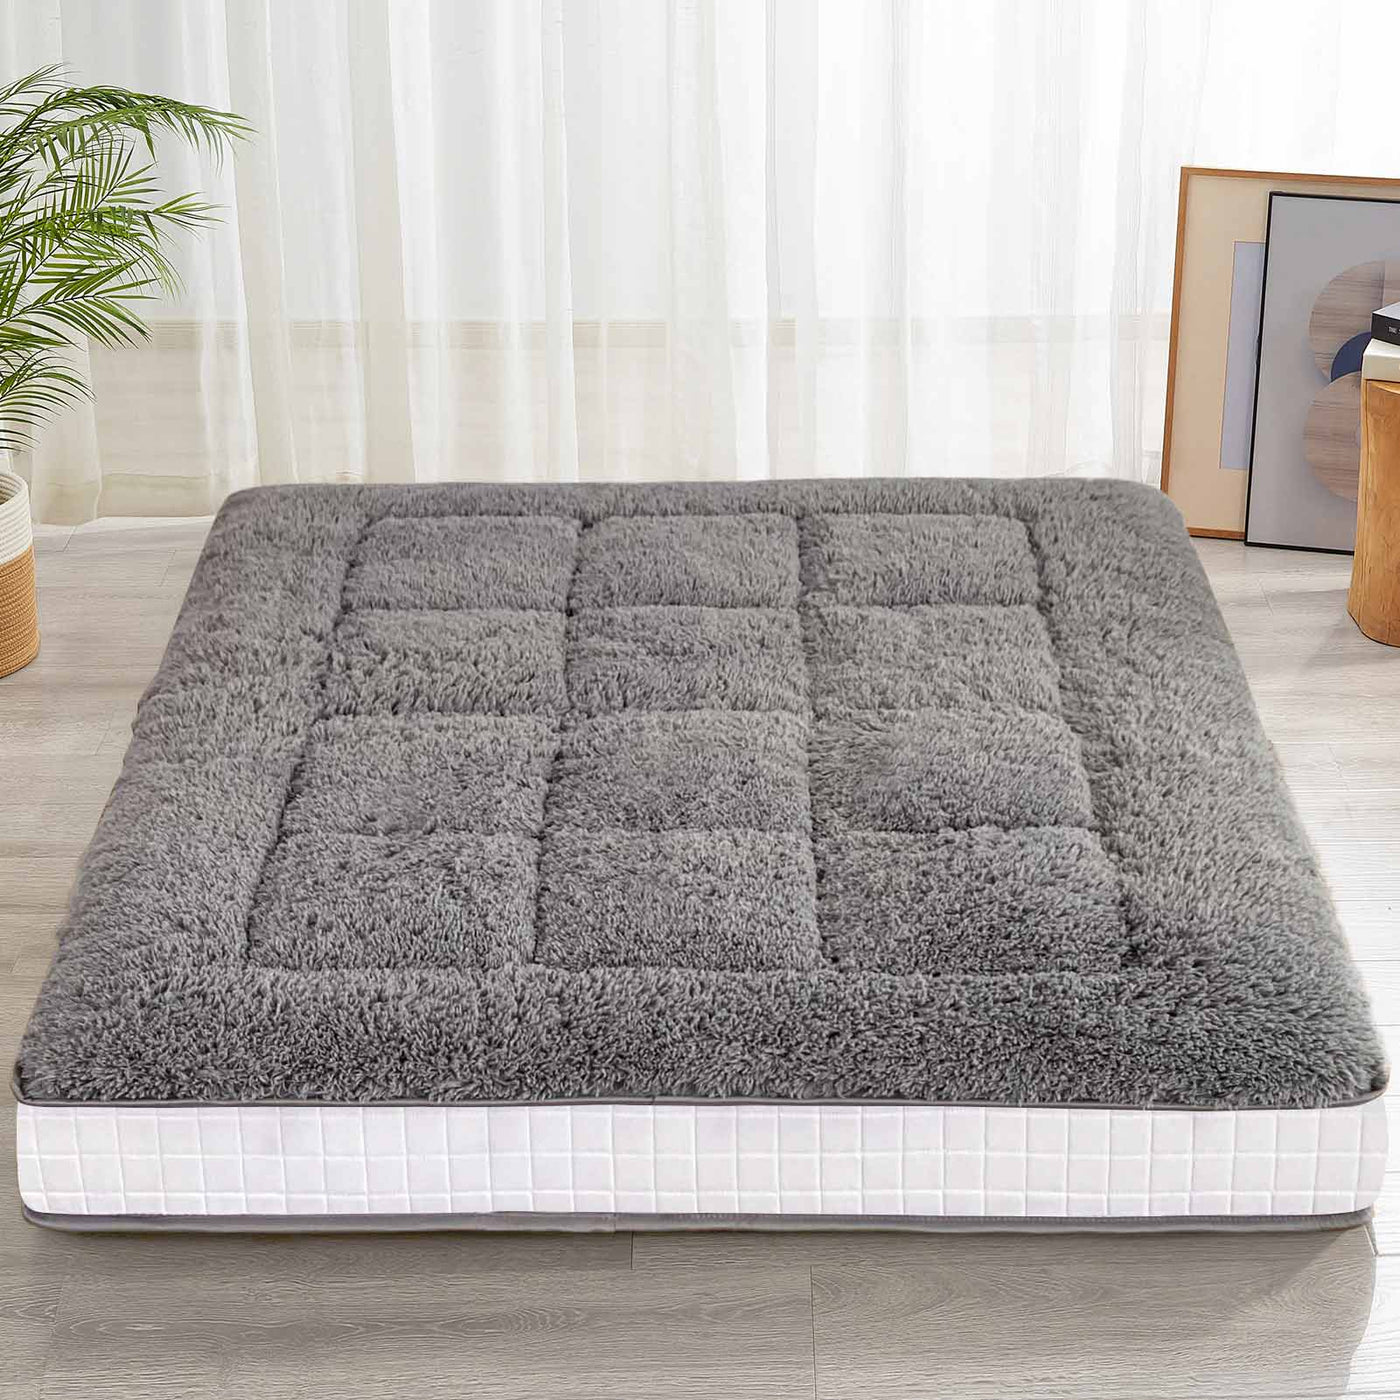 MAXYOYO 6" Extra Thick Fluffy Floor Futon Mattress, Long Plush Square Quilted Floor Mattress for Adults, Dark Grey